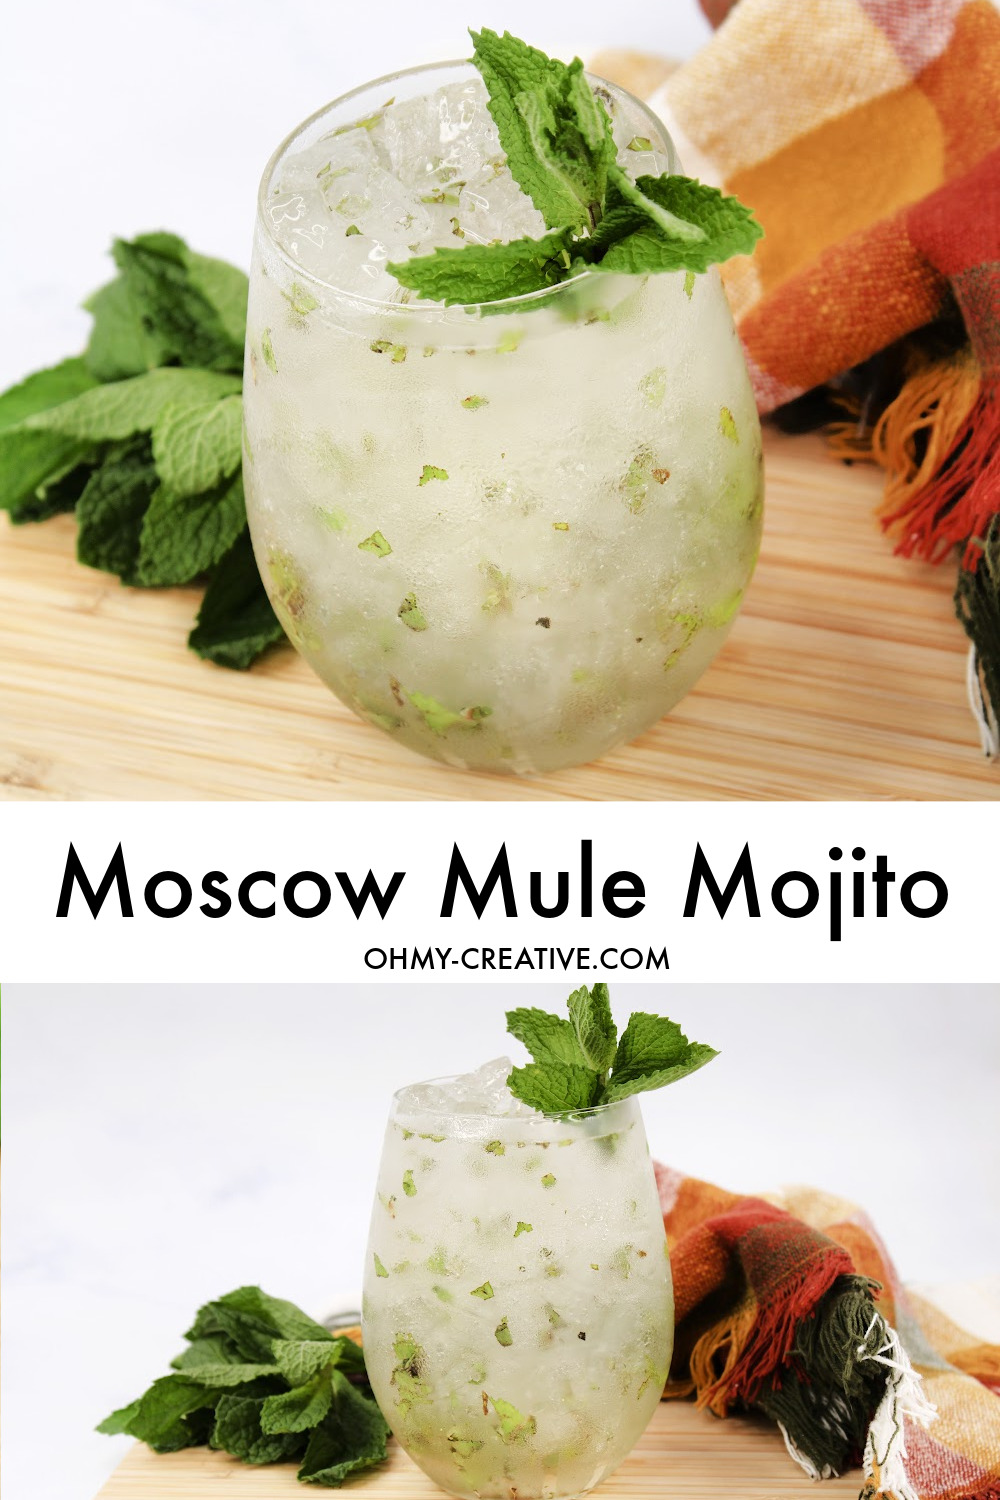 This Moscow Mule Mojito is displayed on a natural wood cutting board with mint and a orange plaid dish towel. A great ginger beer drink!